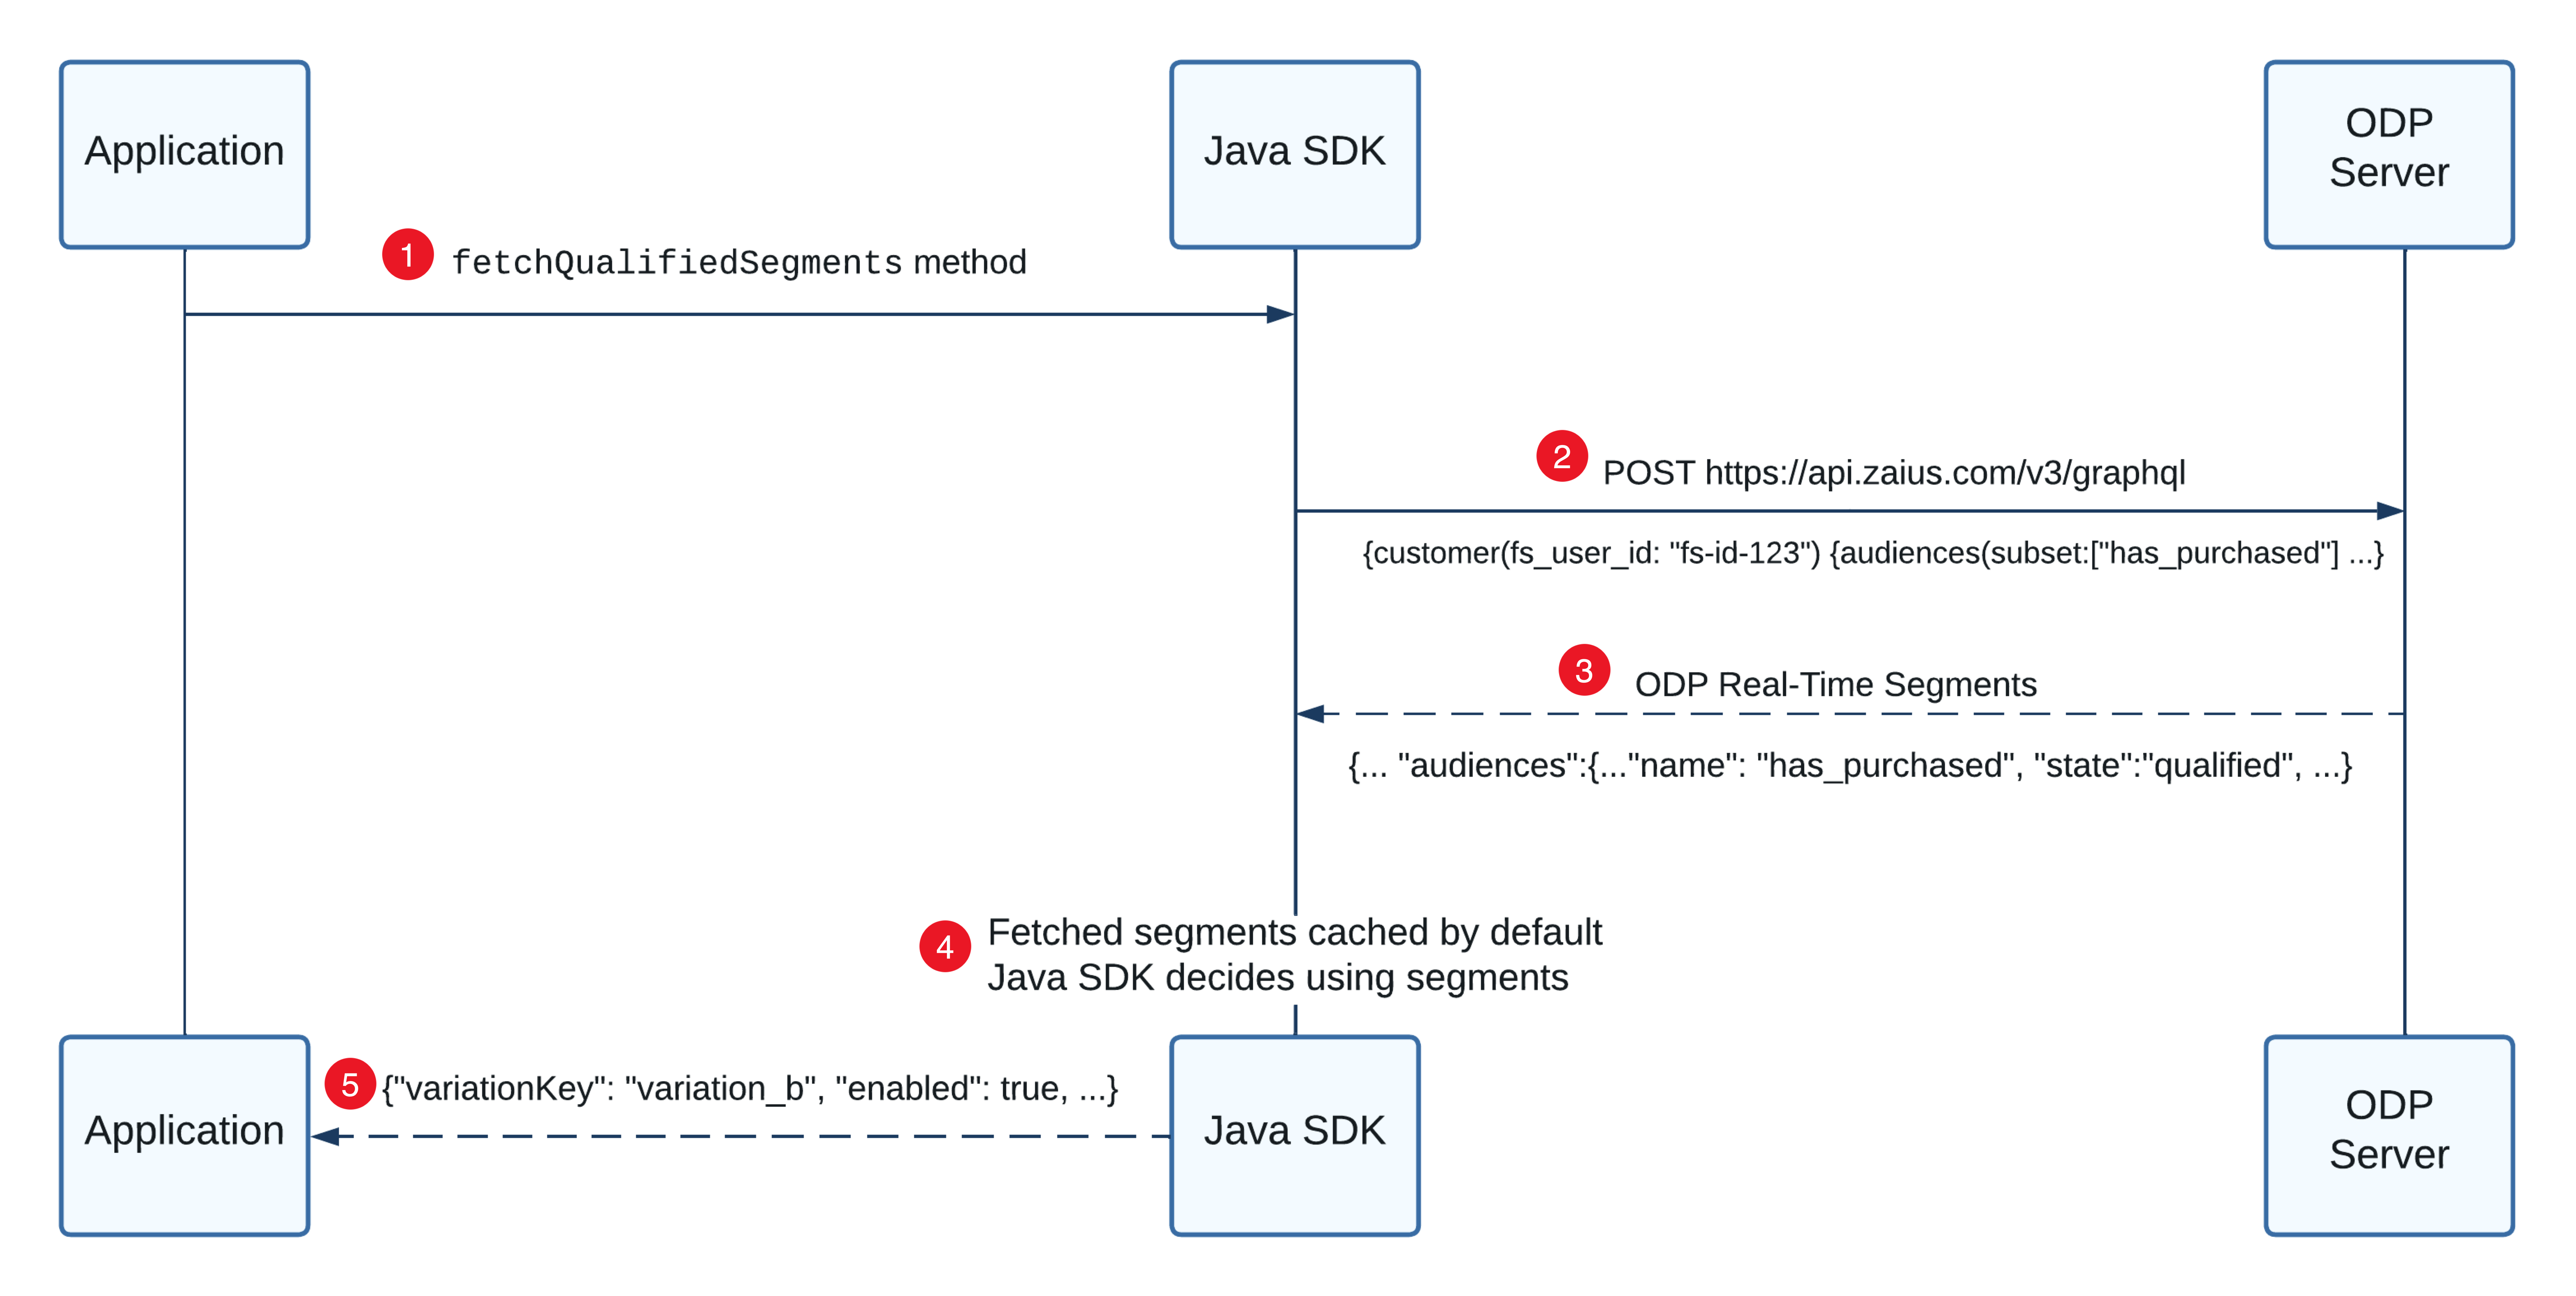 Java SDK network call to ODP